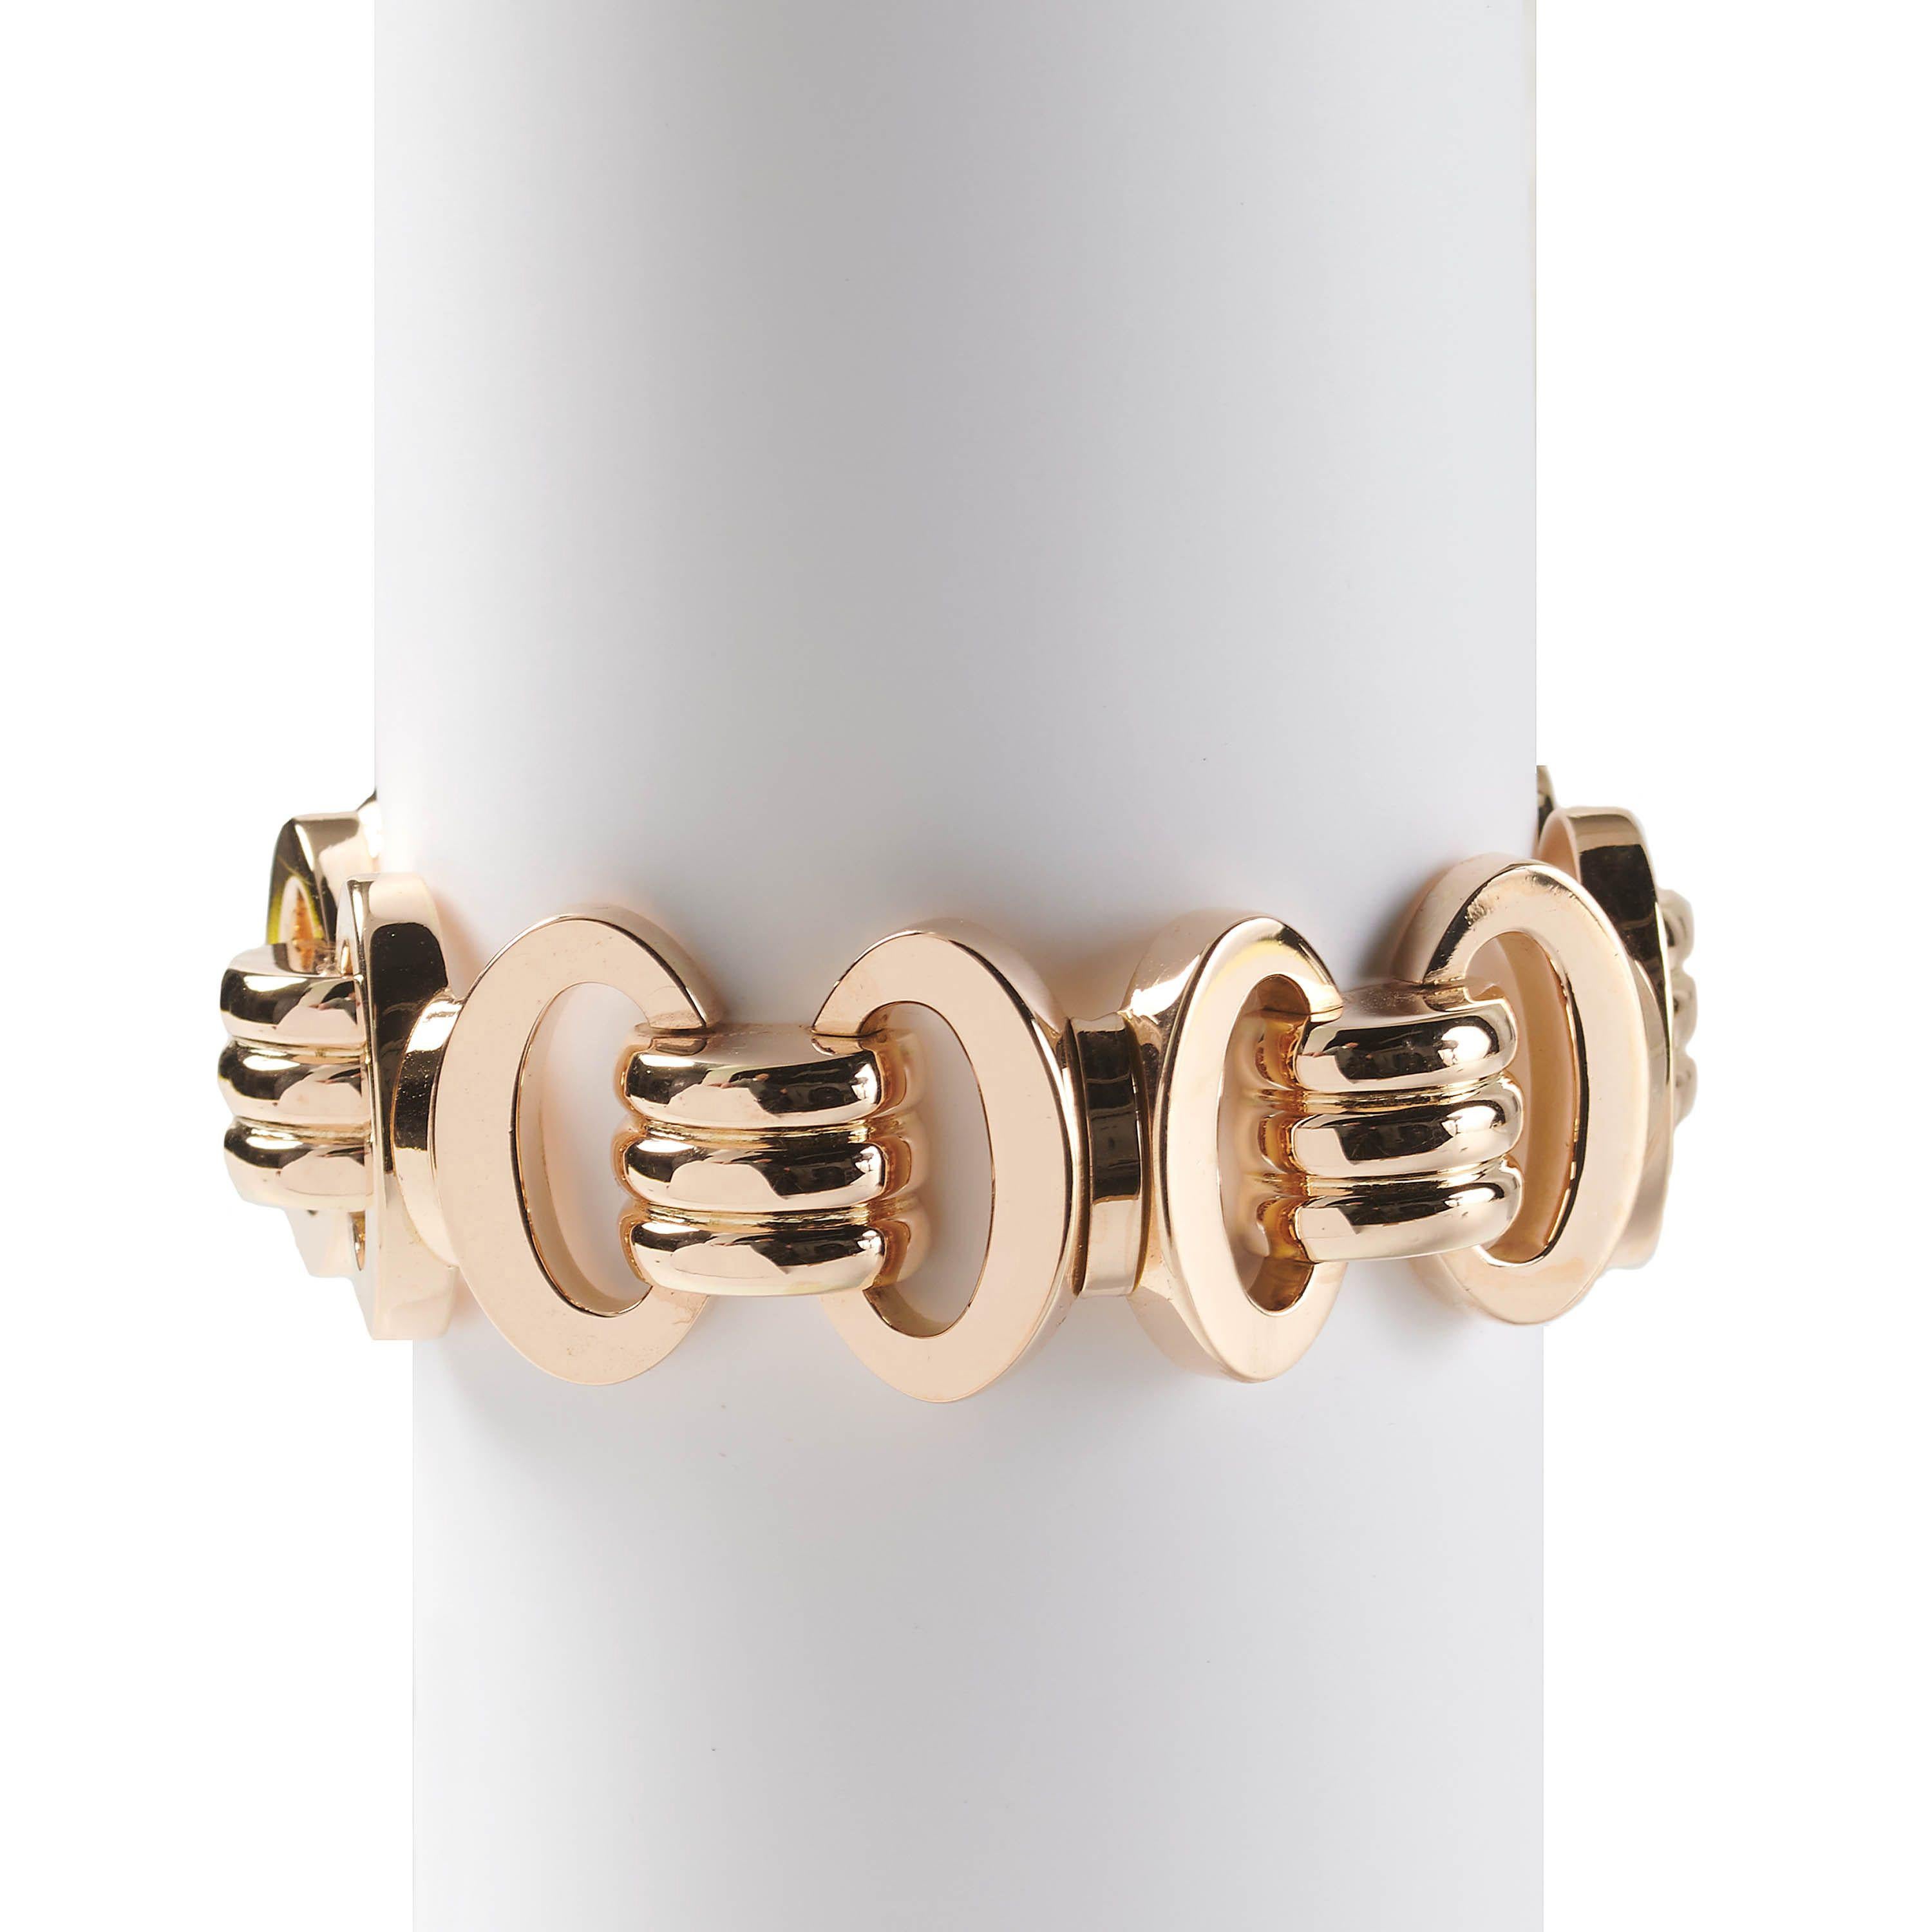 A French vintage rose gold tank bracelet, with alternating pairs of angled oval, hollow ware, links and triple row curved bars, mounted in 18ct gold, circa 1947.